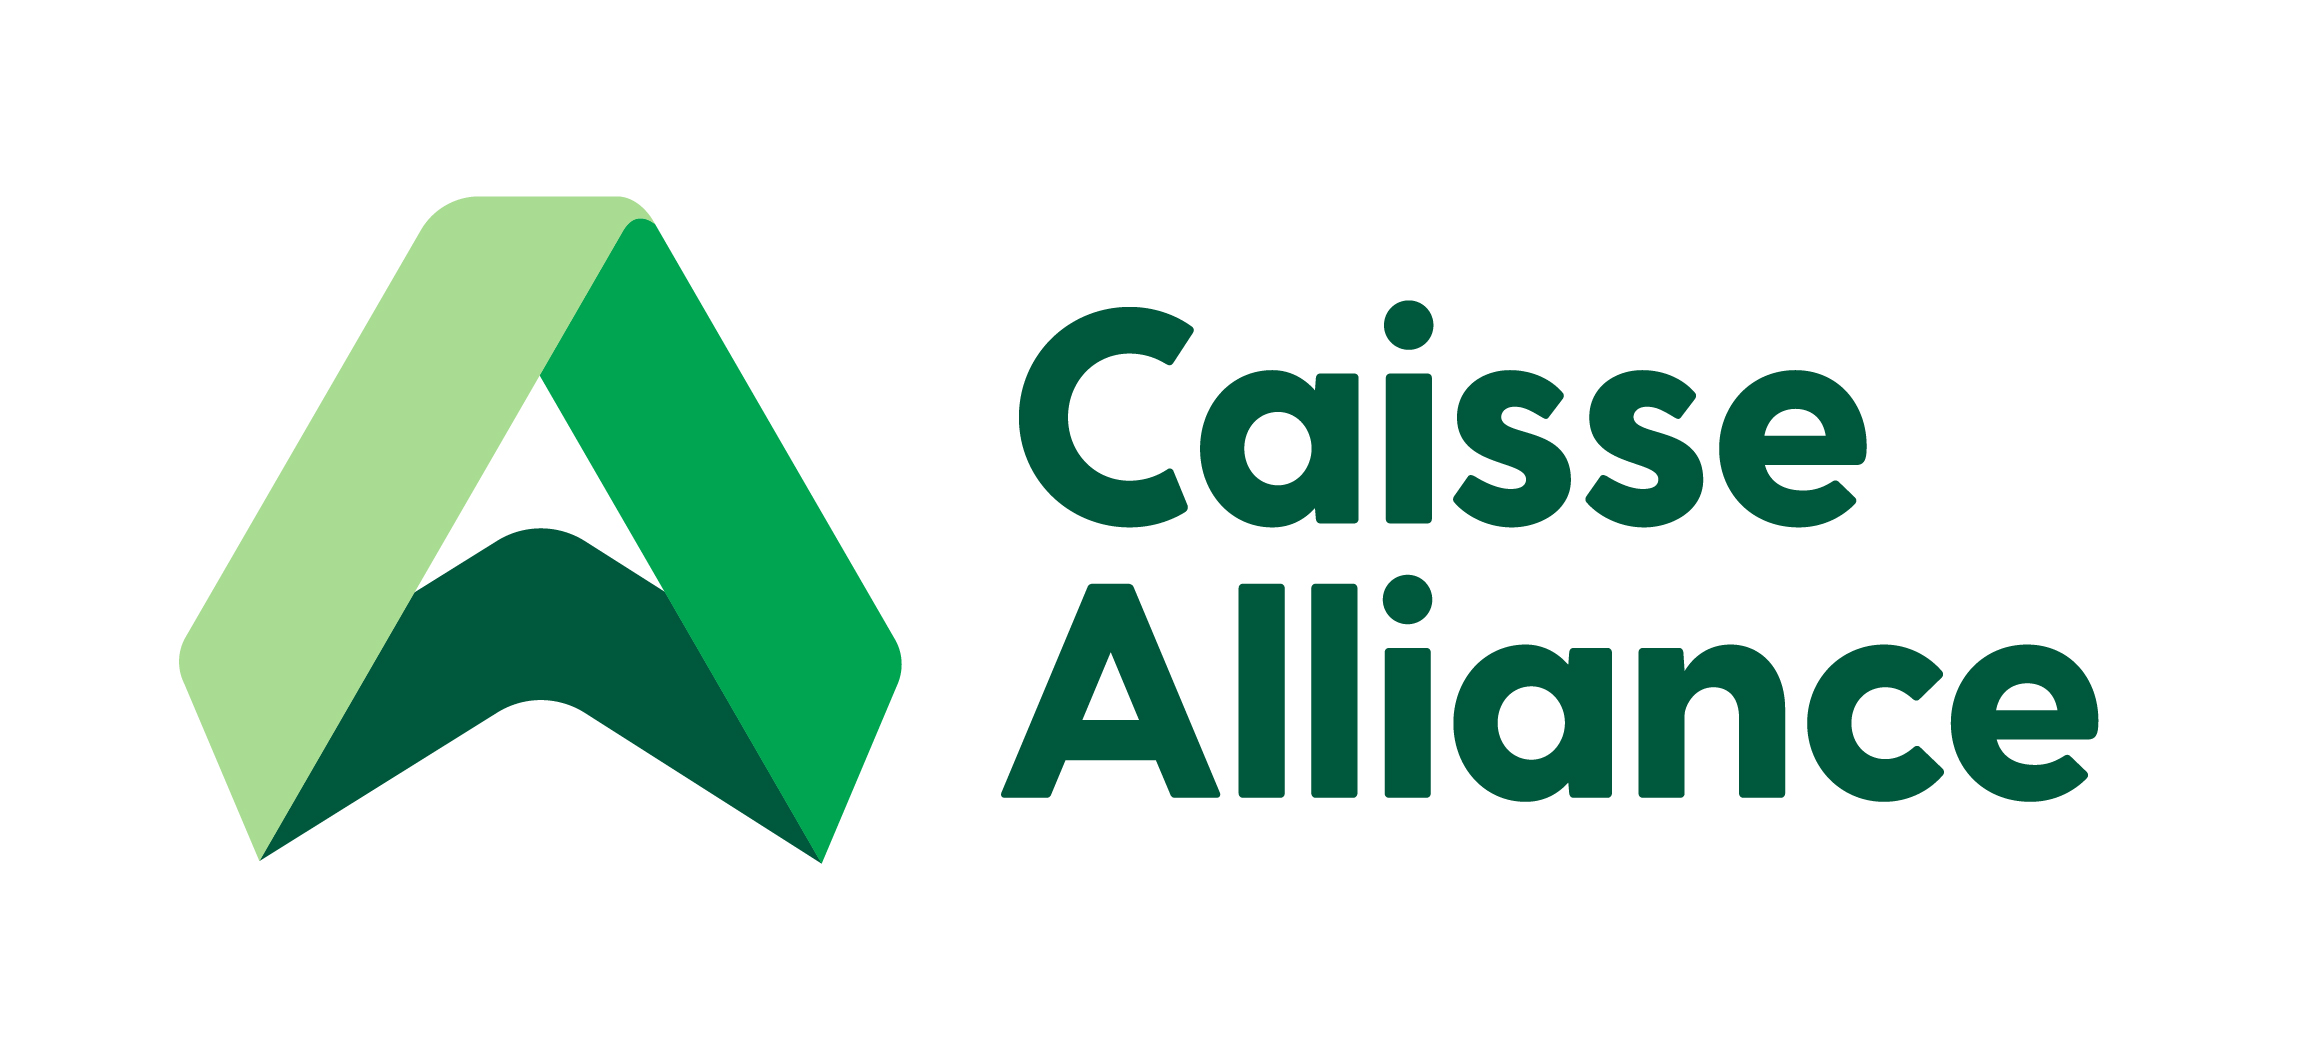 Logo image for Caisse Alliance